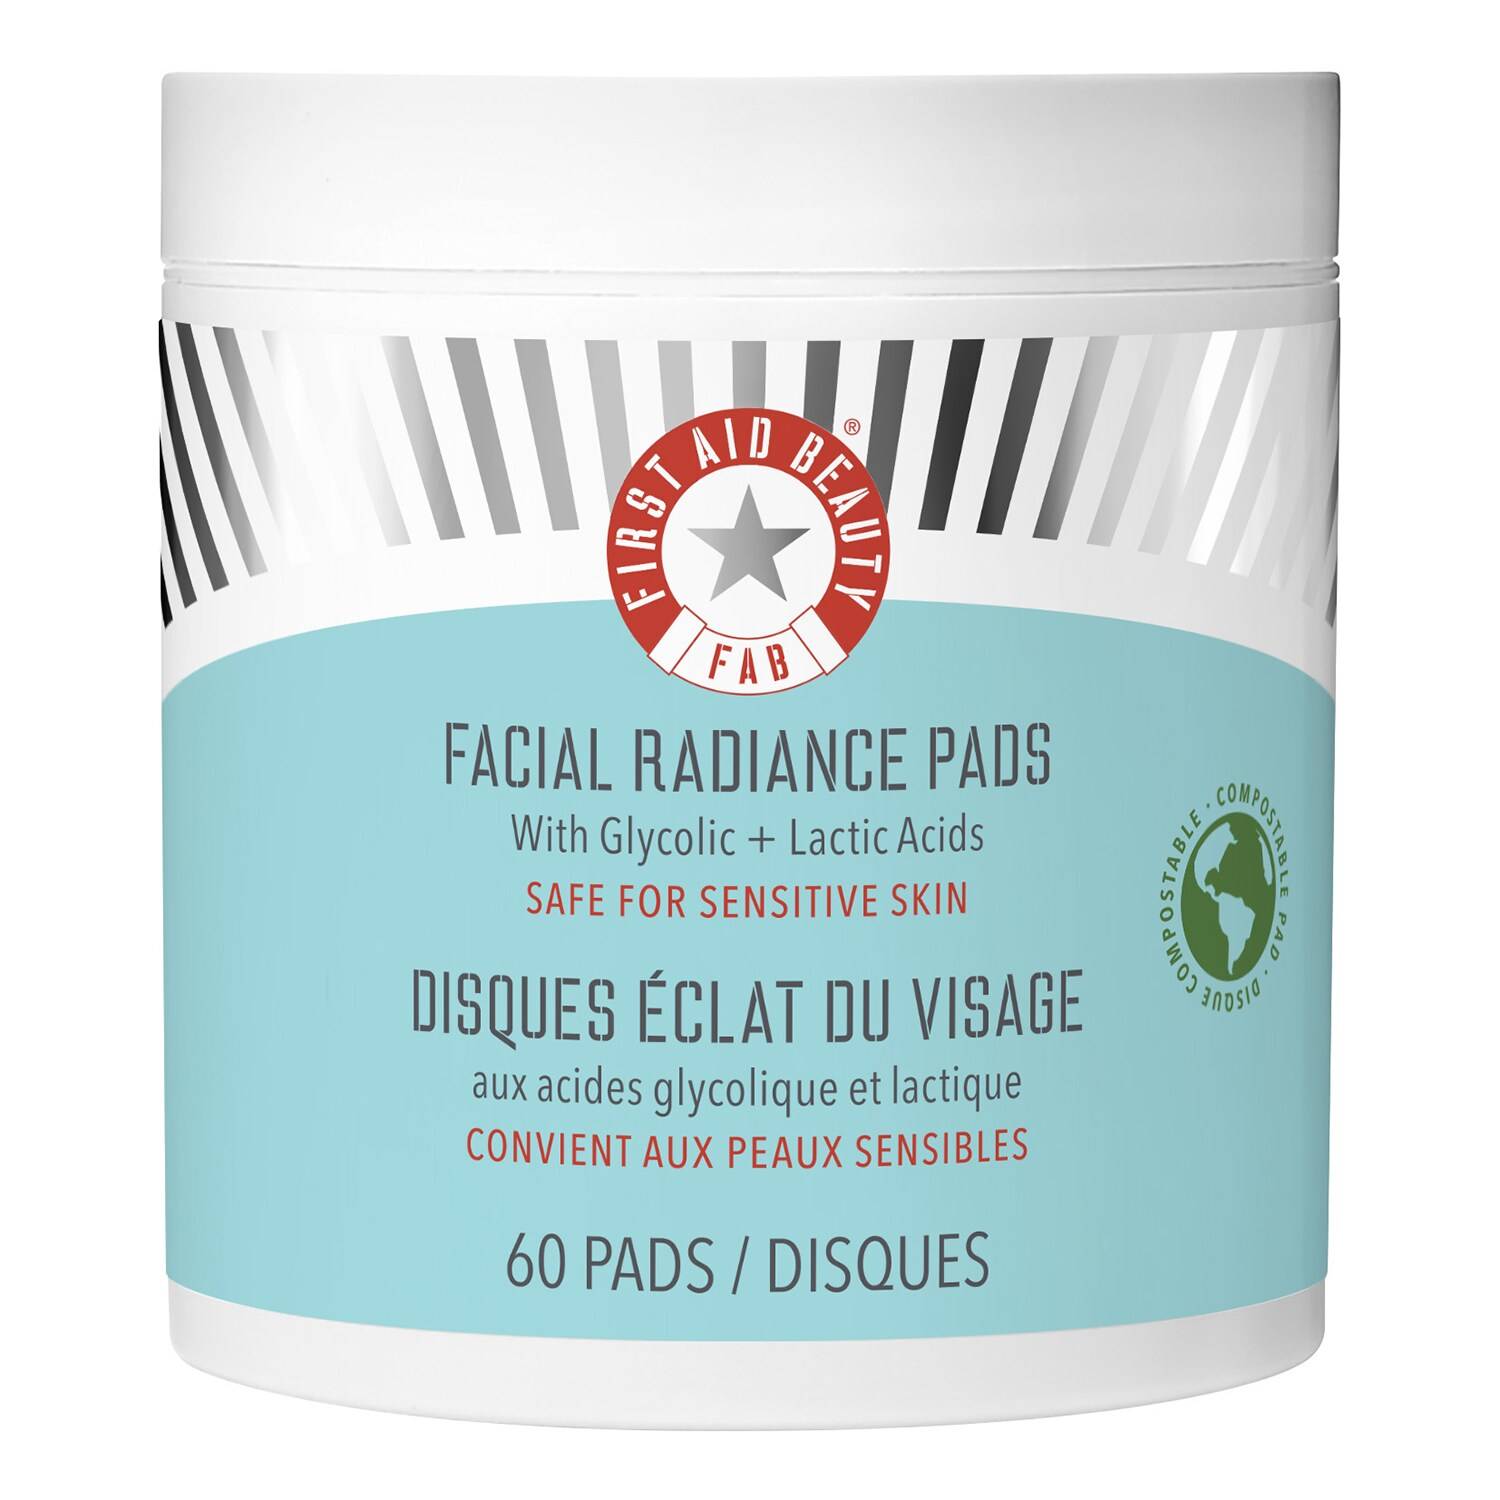 FIRST AID BEAUTY Facial Radiance Pads with Glycolic + Lactic Acids 60 Pads